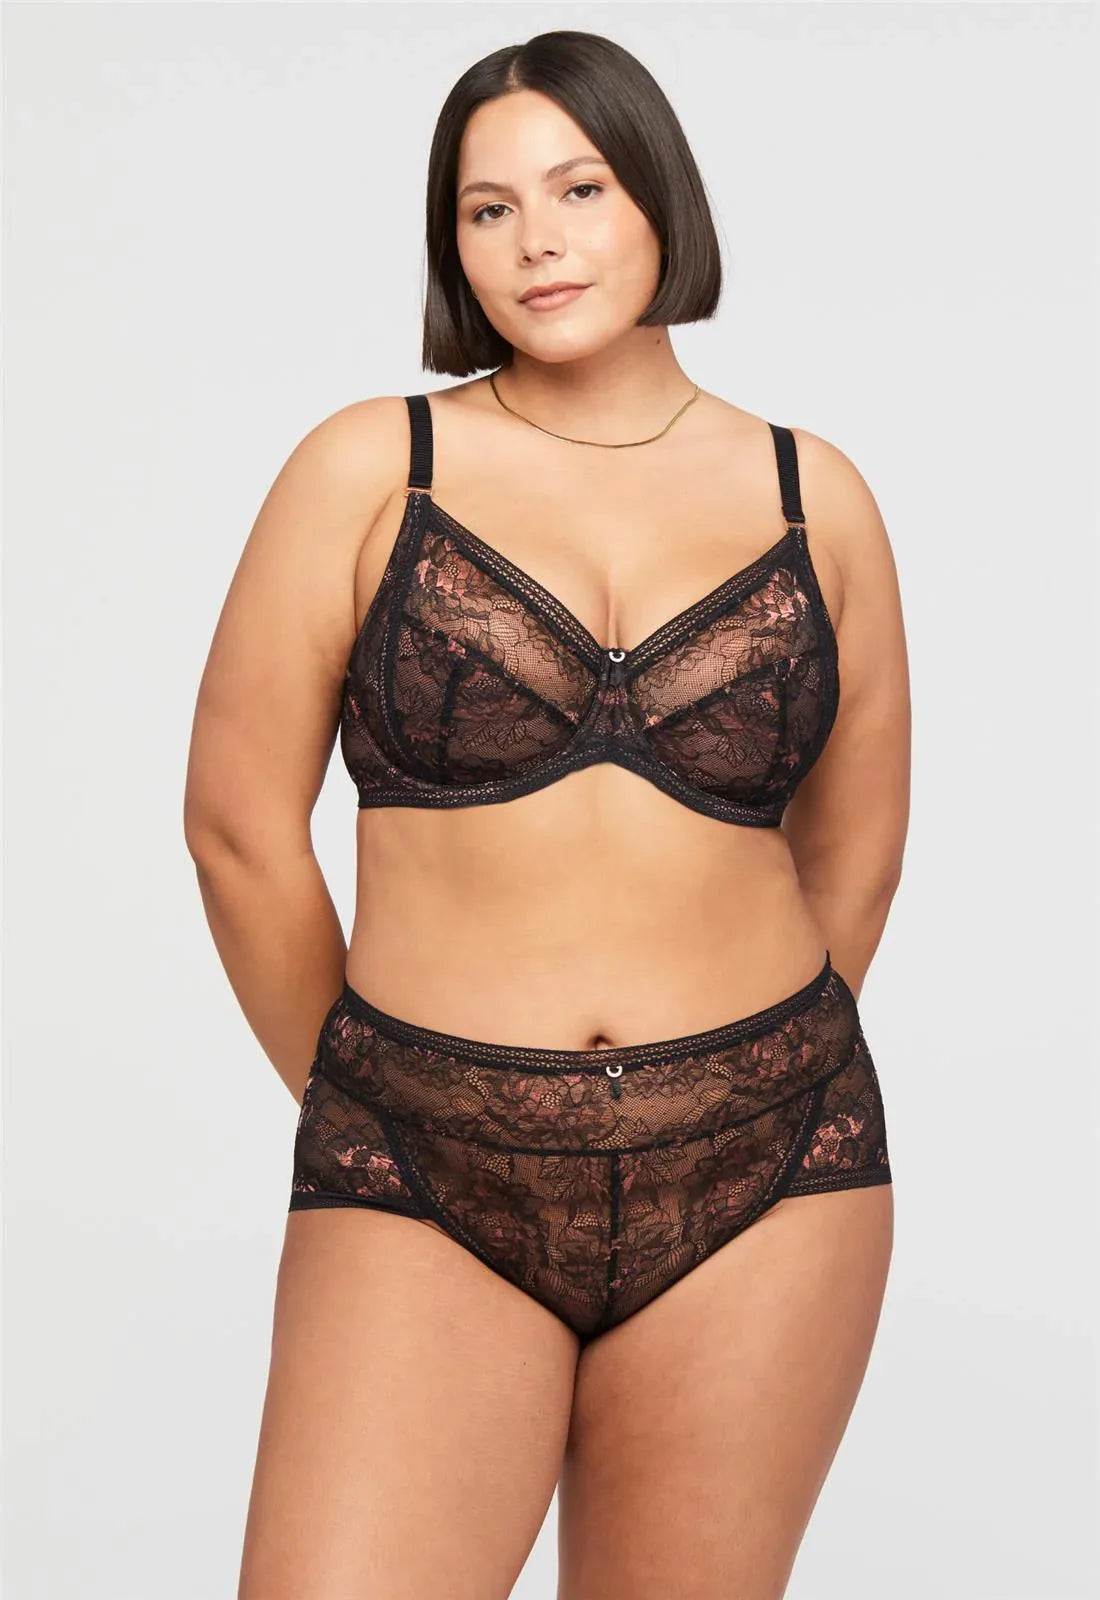 Enchanted Muse Full-Coverage Lace Bra at Belle Lacet Lingerie.